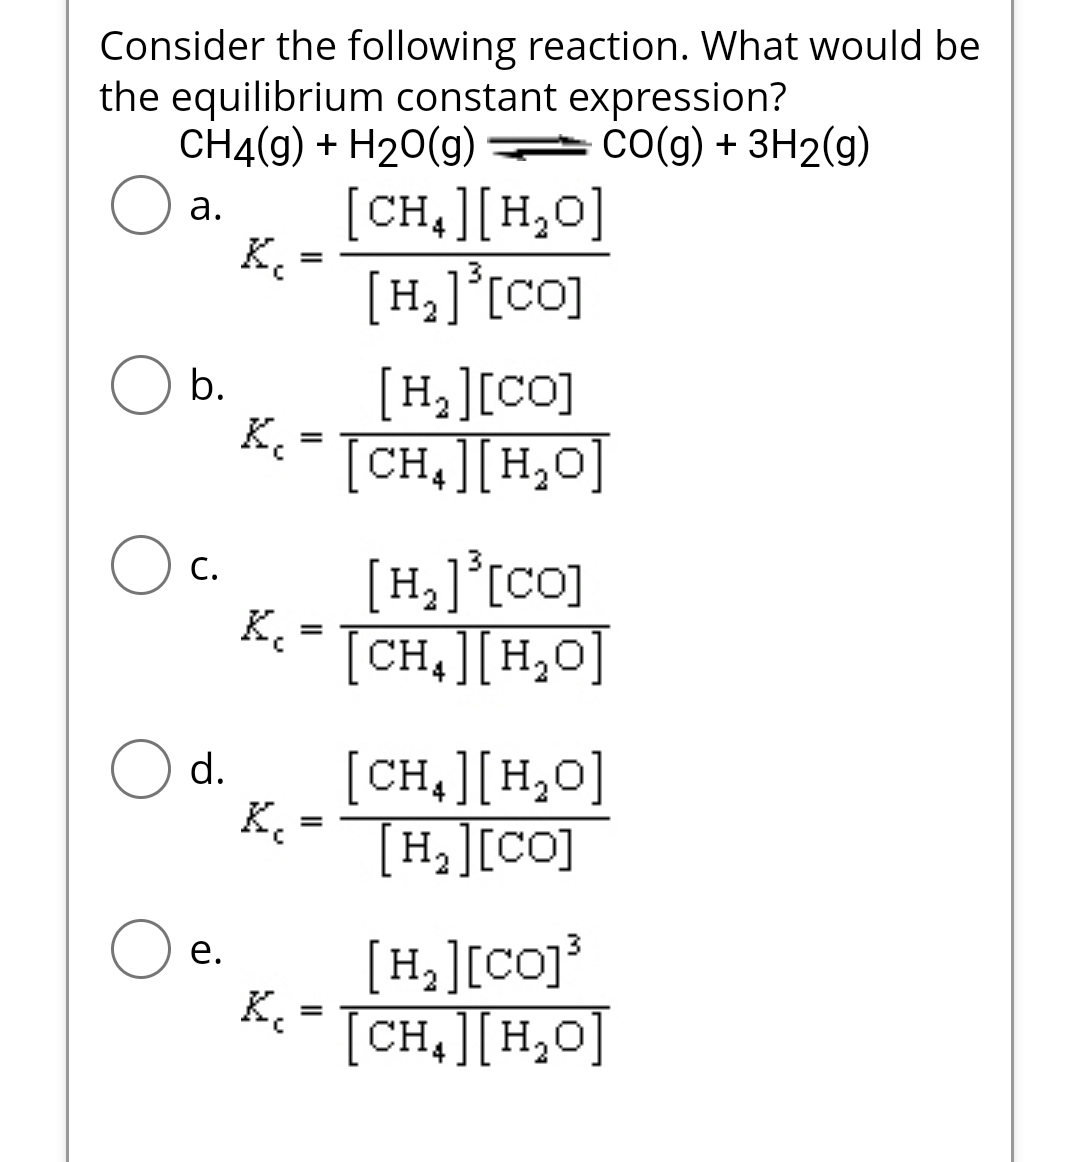 Consider the following reaction. What would be
the equilibrium constant expression?
CH4(g) + H₂O(g)CO(g) + 3H2(g)
a.
b.
C.
d.
e.
K₁
K.
=
[H][co]
Kc = [CH₂] [H₂O]
K₁
K₂
=
K₁=
[CH4][H,O]
[H,][co]
=
[H,][co]
[CH4][H,O]
[CH,][H,O]
[H,][CO]
[H,][co]3
[CH][H,O]